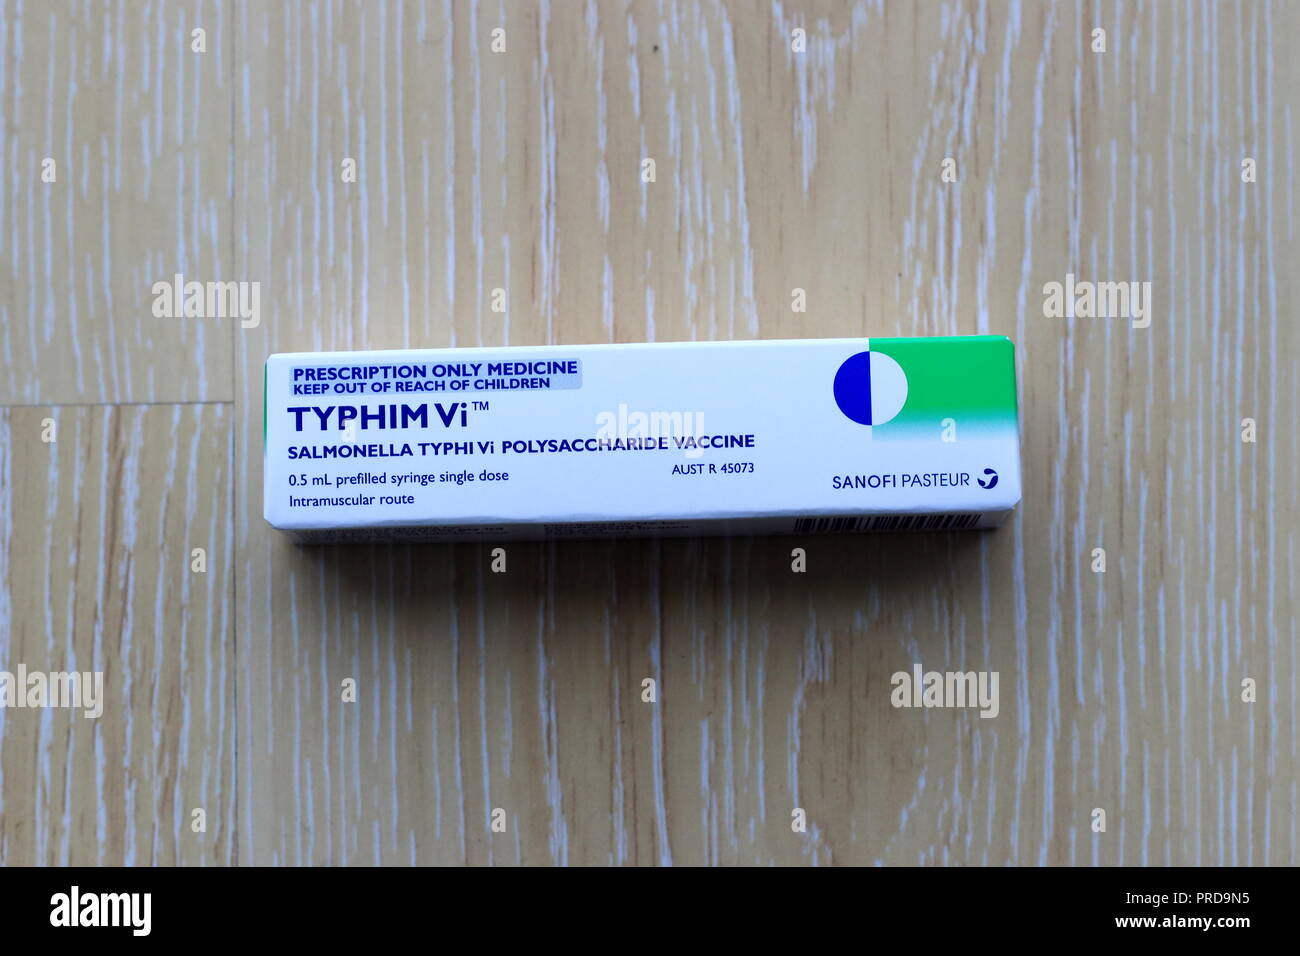 NOT ACTUAL MEDICATION - Typhim Vi or typhoid vaccine Stock Photo